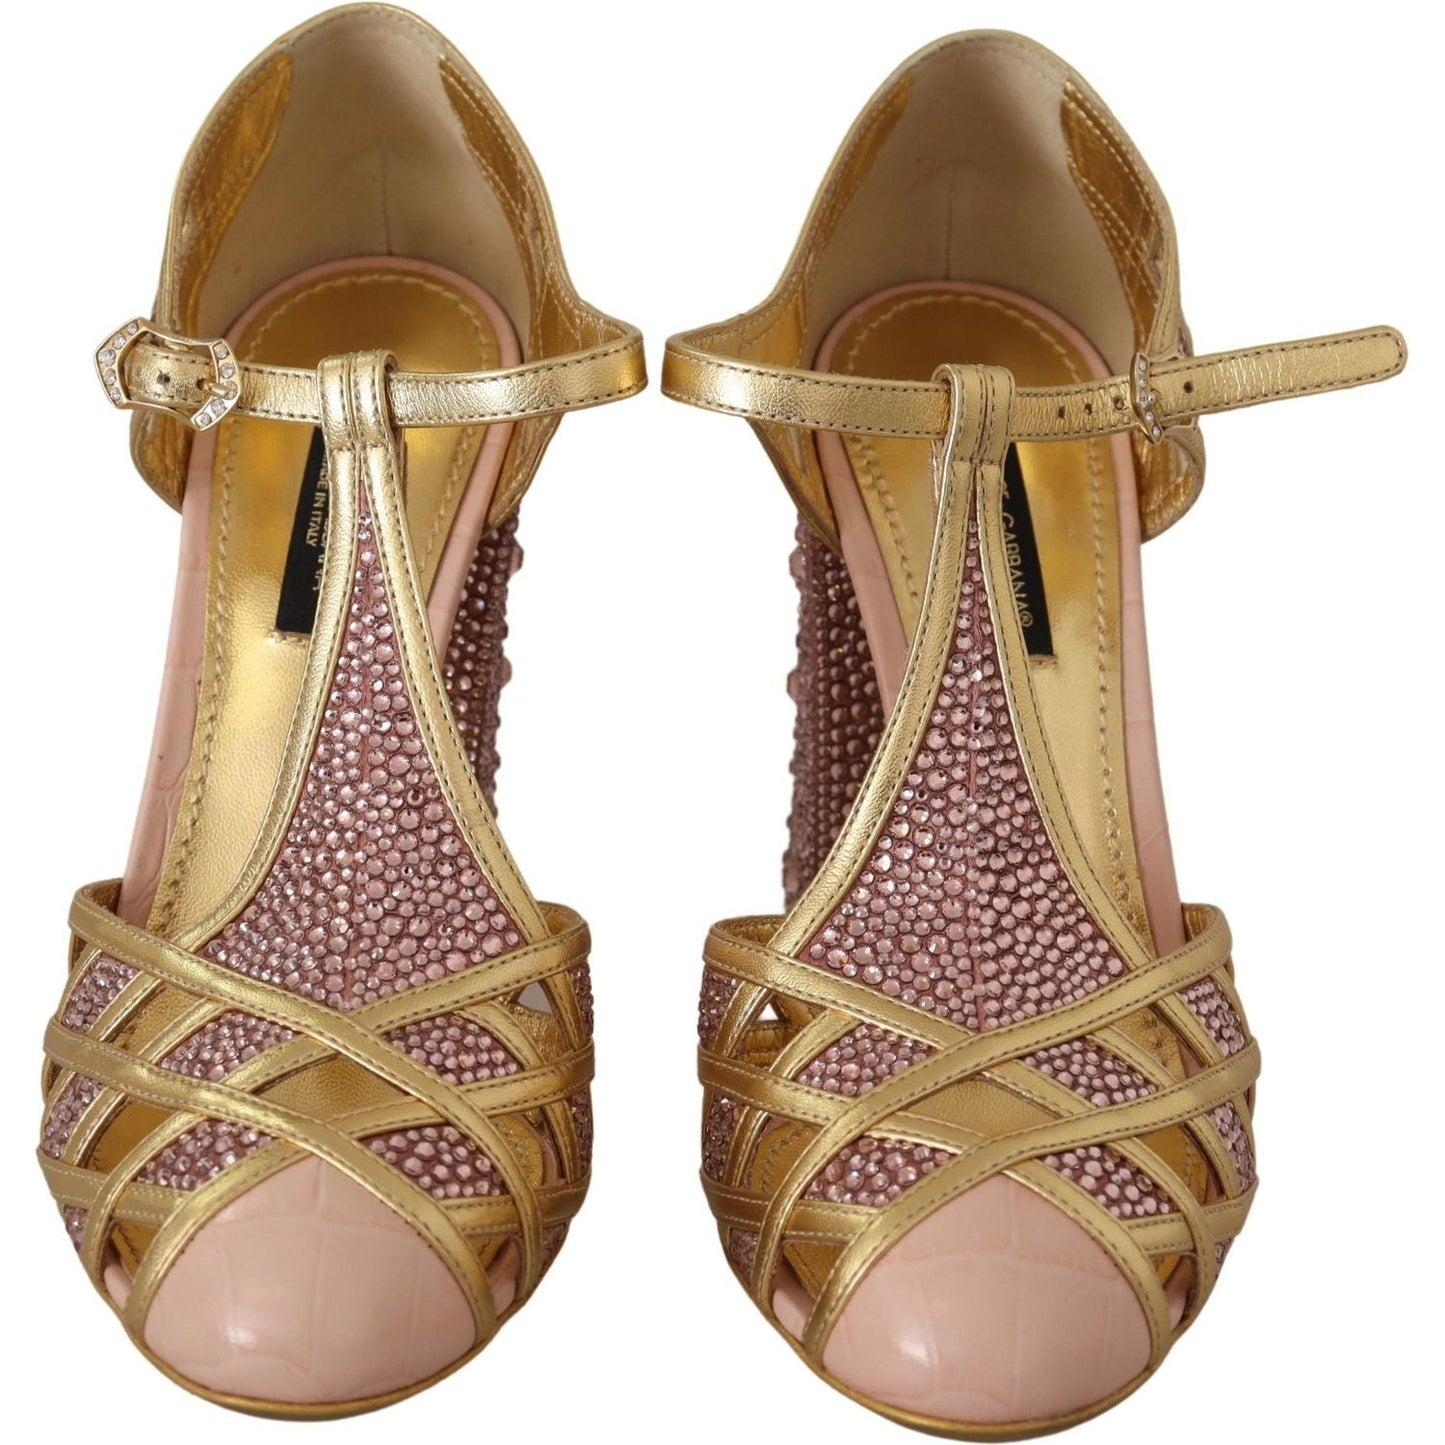 Dolce & Gabbana Silk-Infused Leather Crystal Pumps in Pink Gold pink-gold-leather-crystal-pumps-t-strap-shoes